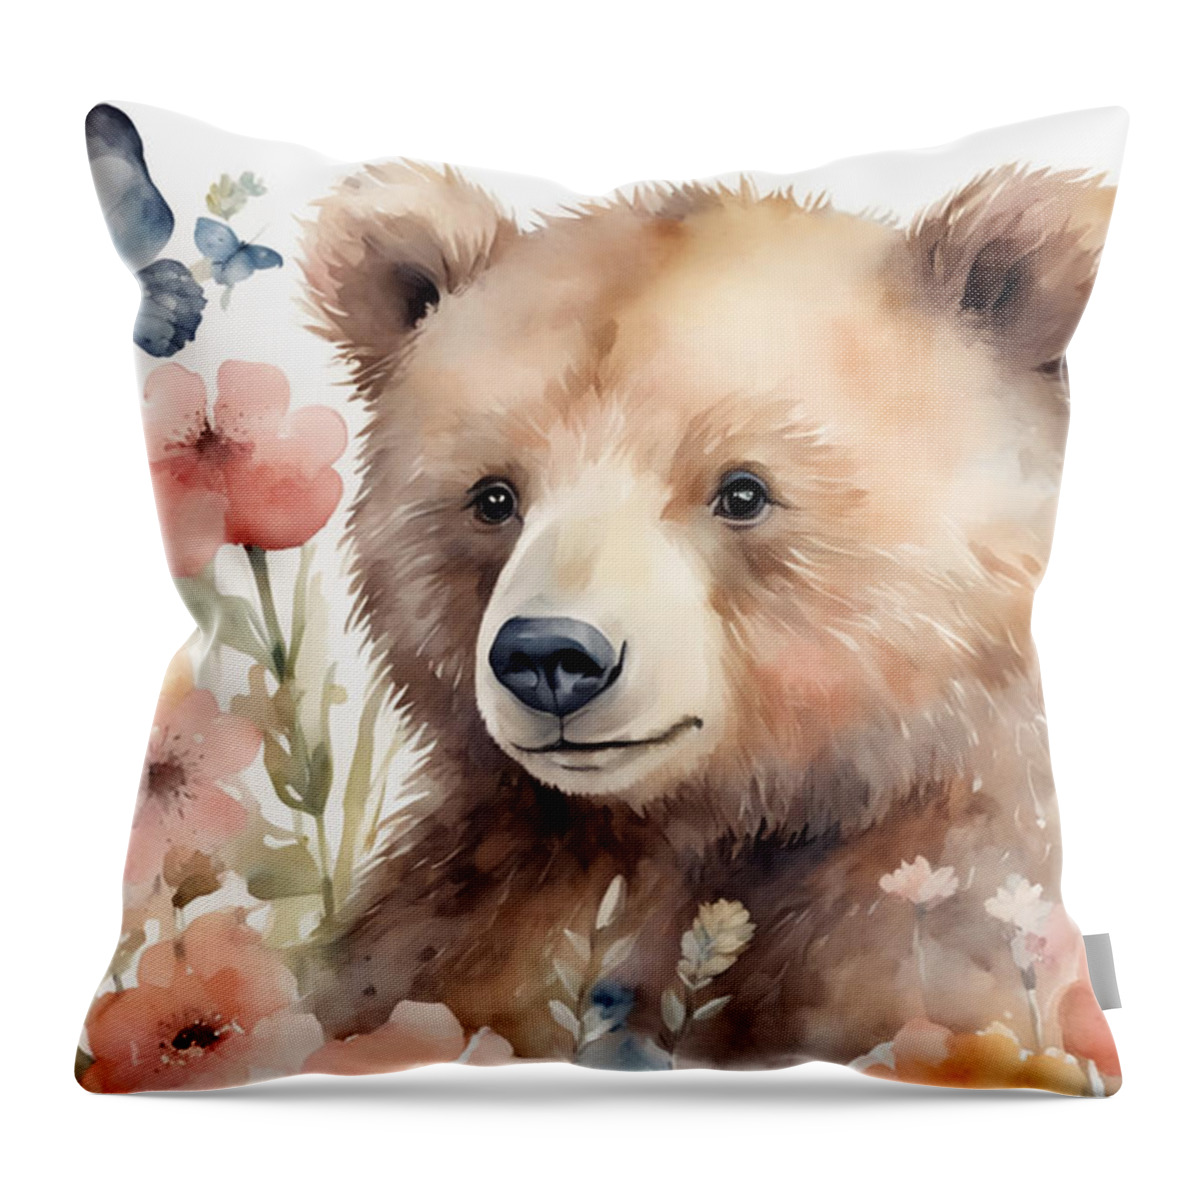 Cute Throw Pillow featuring the painting Baby Bear by Manjik Pictures